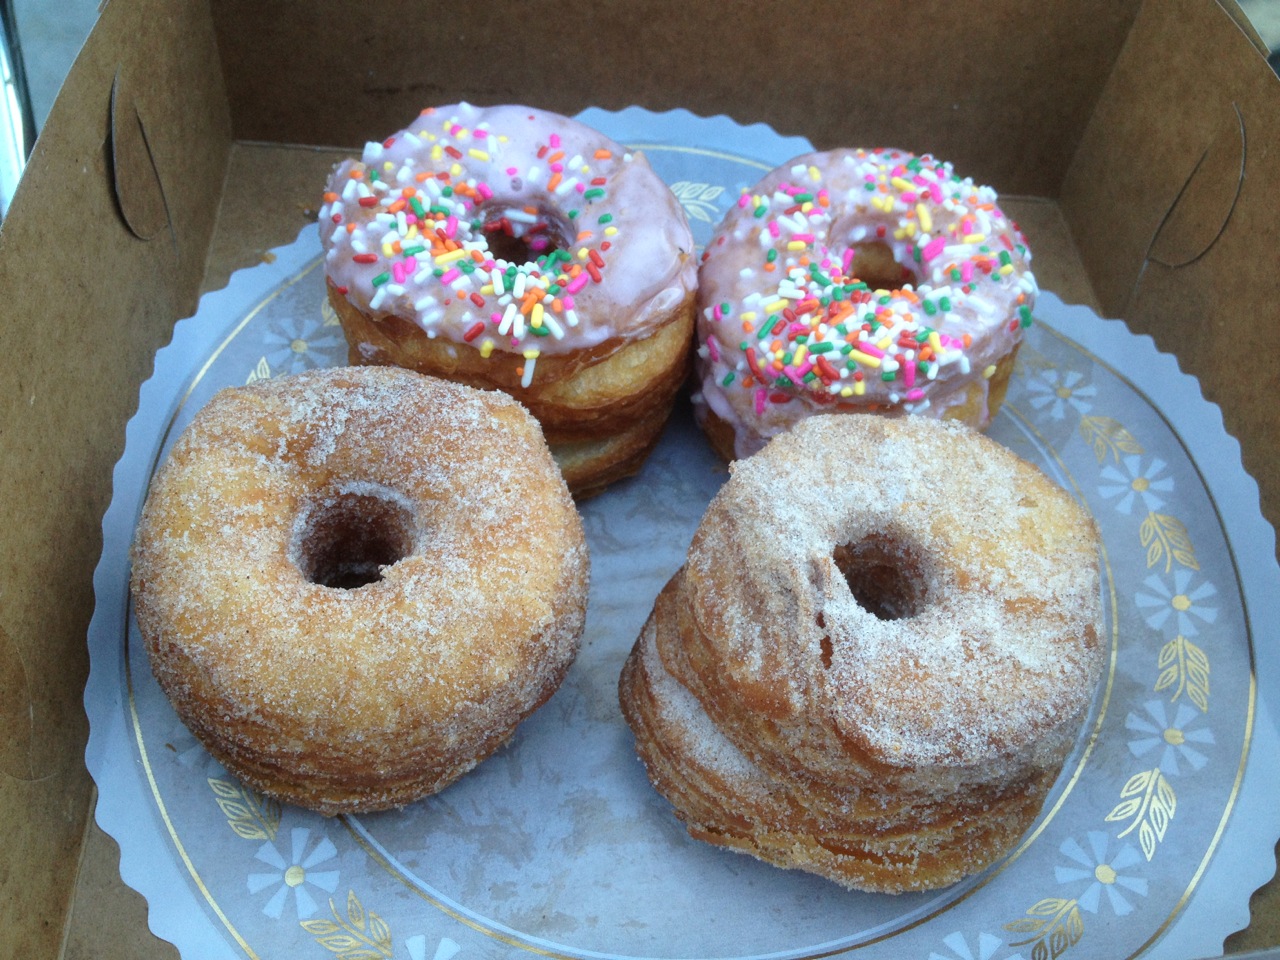 Cronuts from fillmore bakeshop